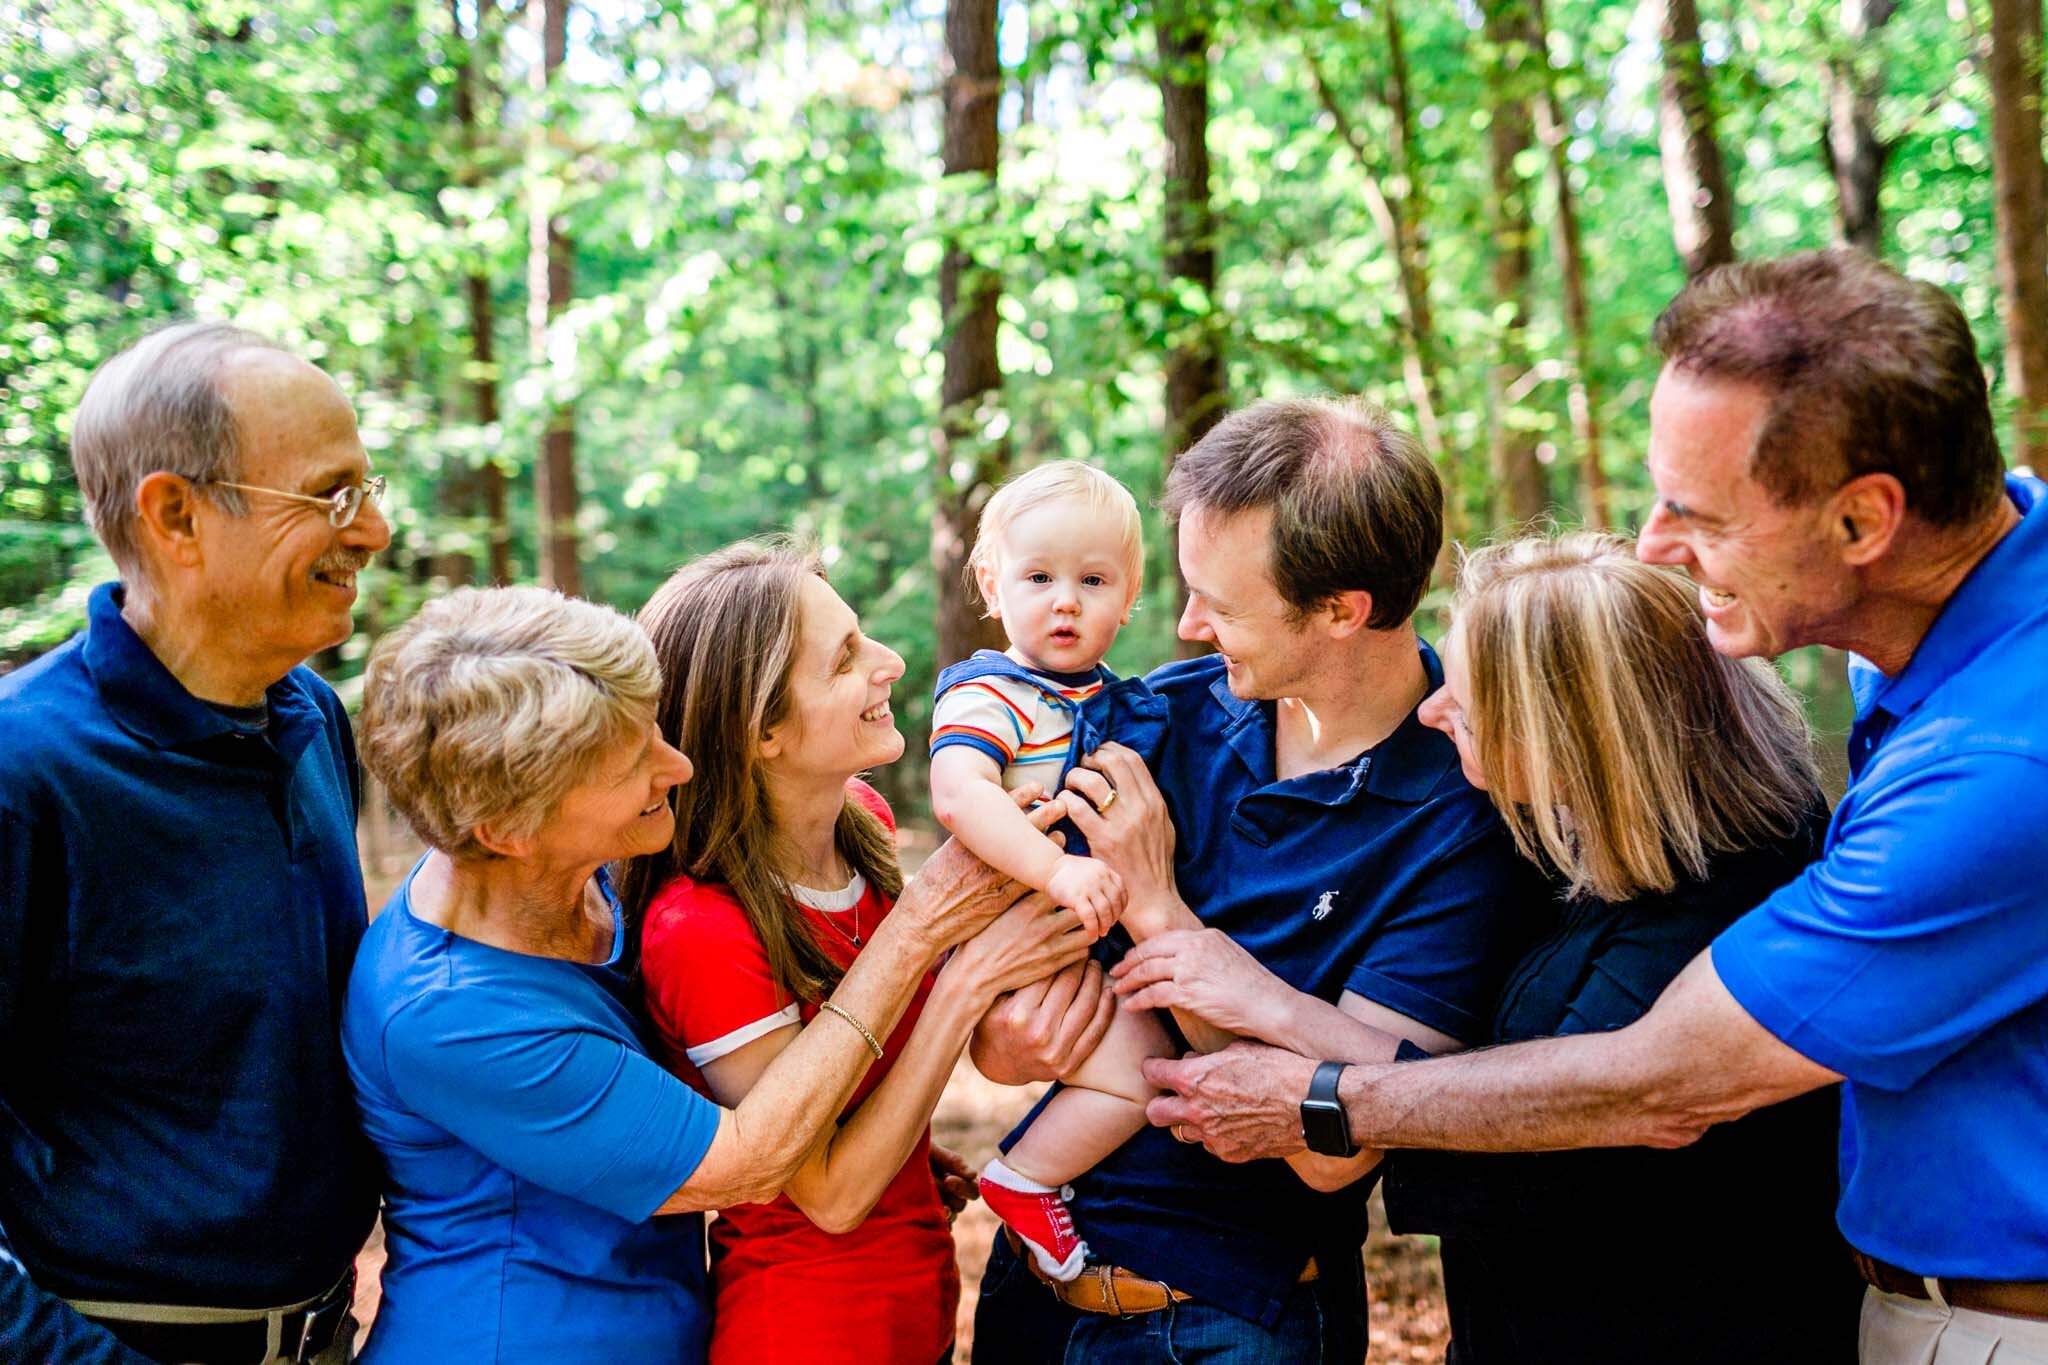 Raleigh Family Photographer | Umstead Park | By G. Lin Photography | Family holding baby and smiling